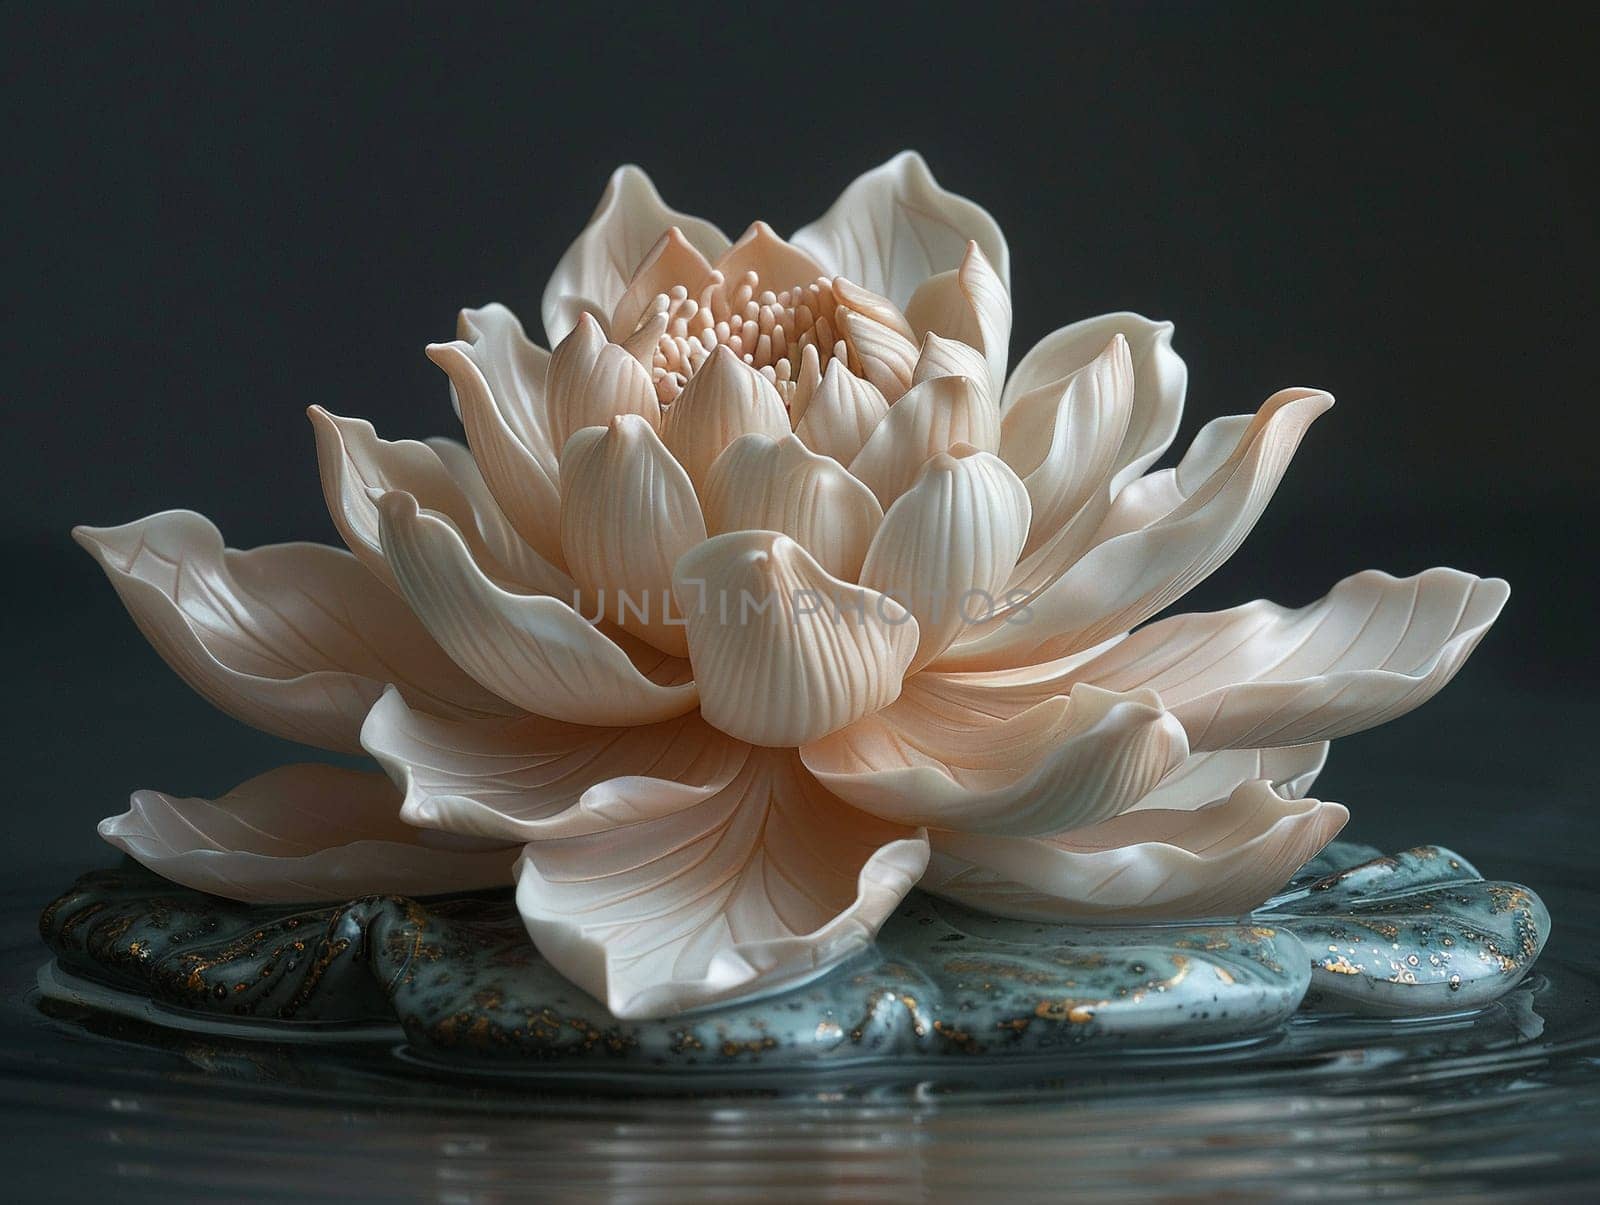 Buddhist Lotus Flower Sculpture Emerging from Water The flowers shape softens into the surface by Benzoix